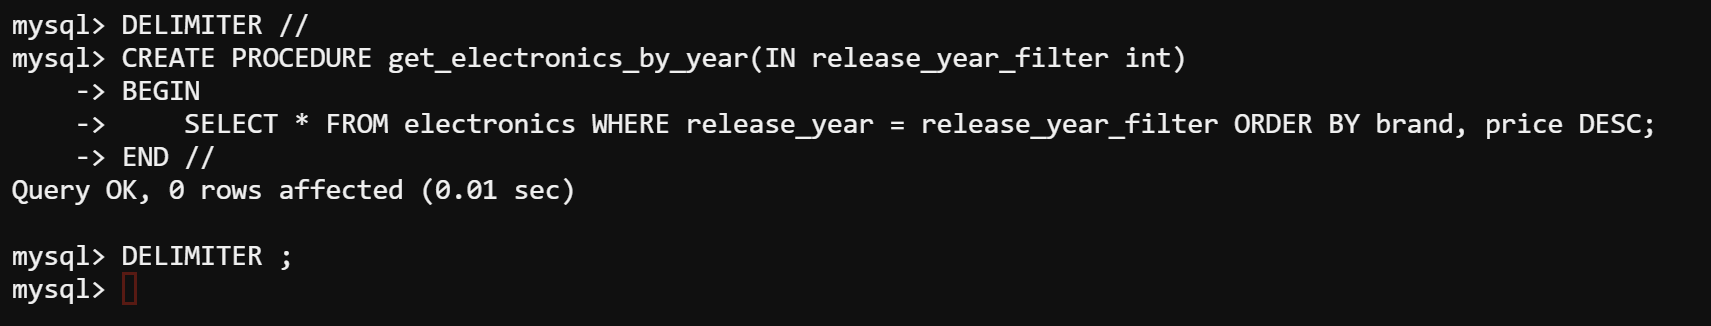 Defining a MySQL stored procedure for retrieving results by release year